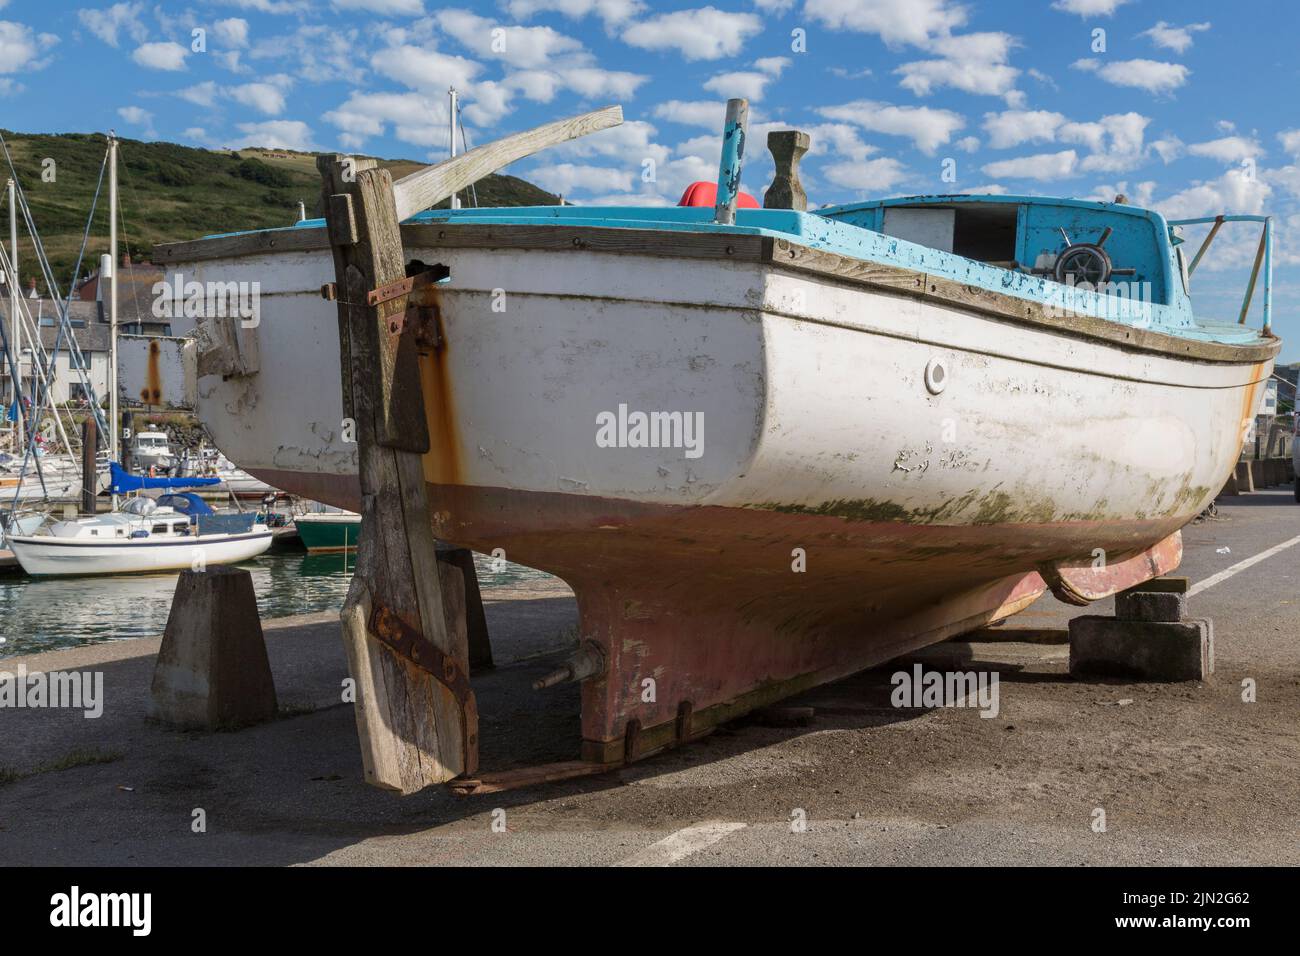 Detail of a small boat dry docked on a quayside. Stock Photo